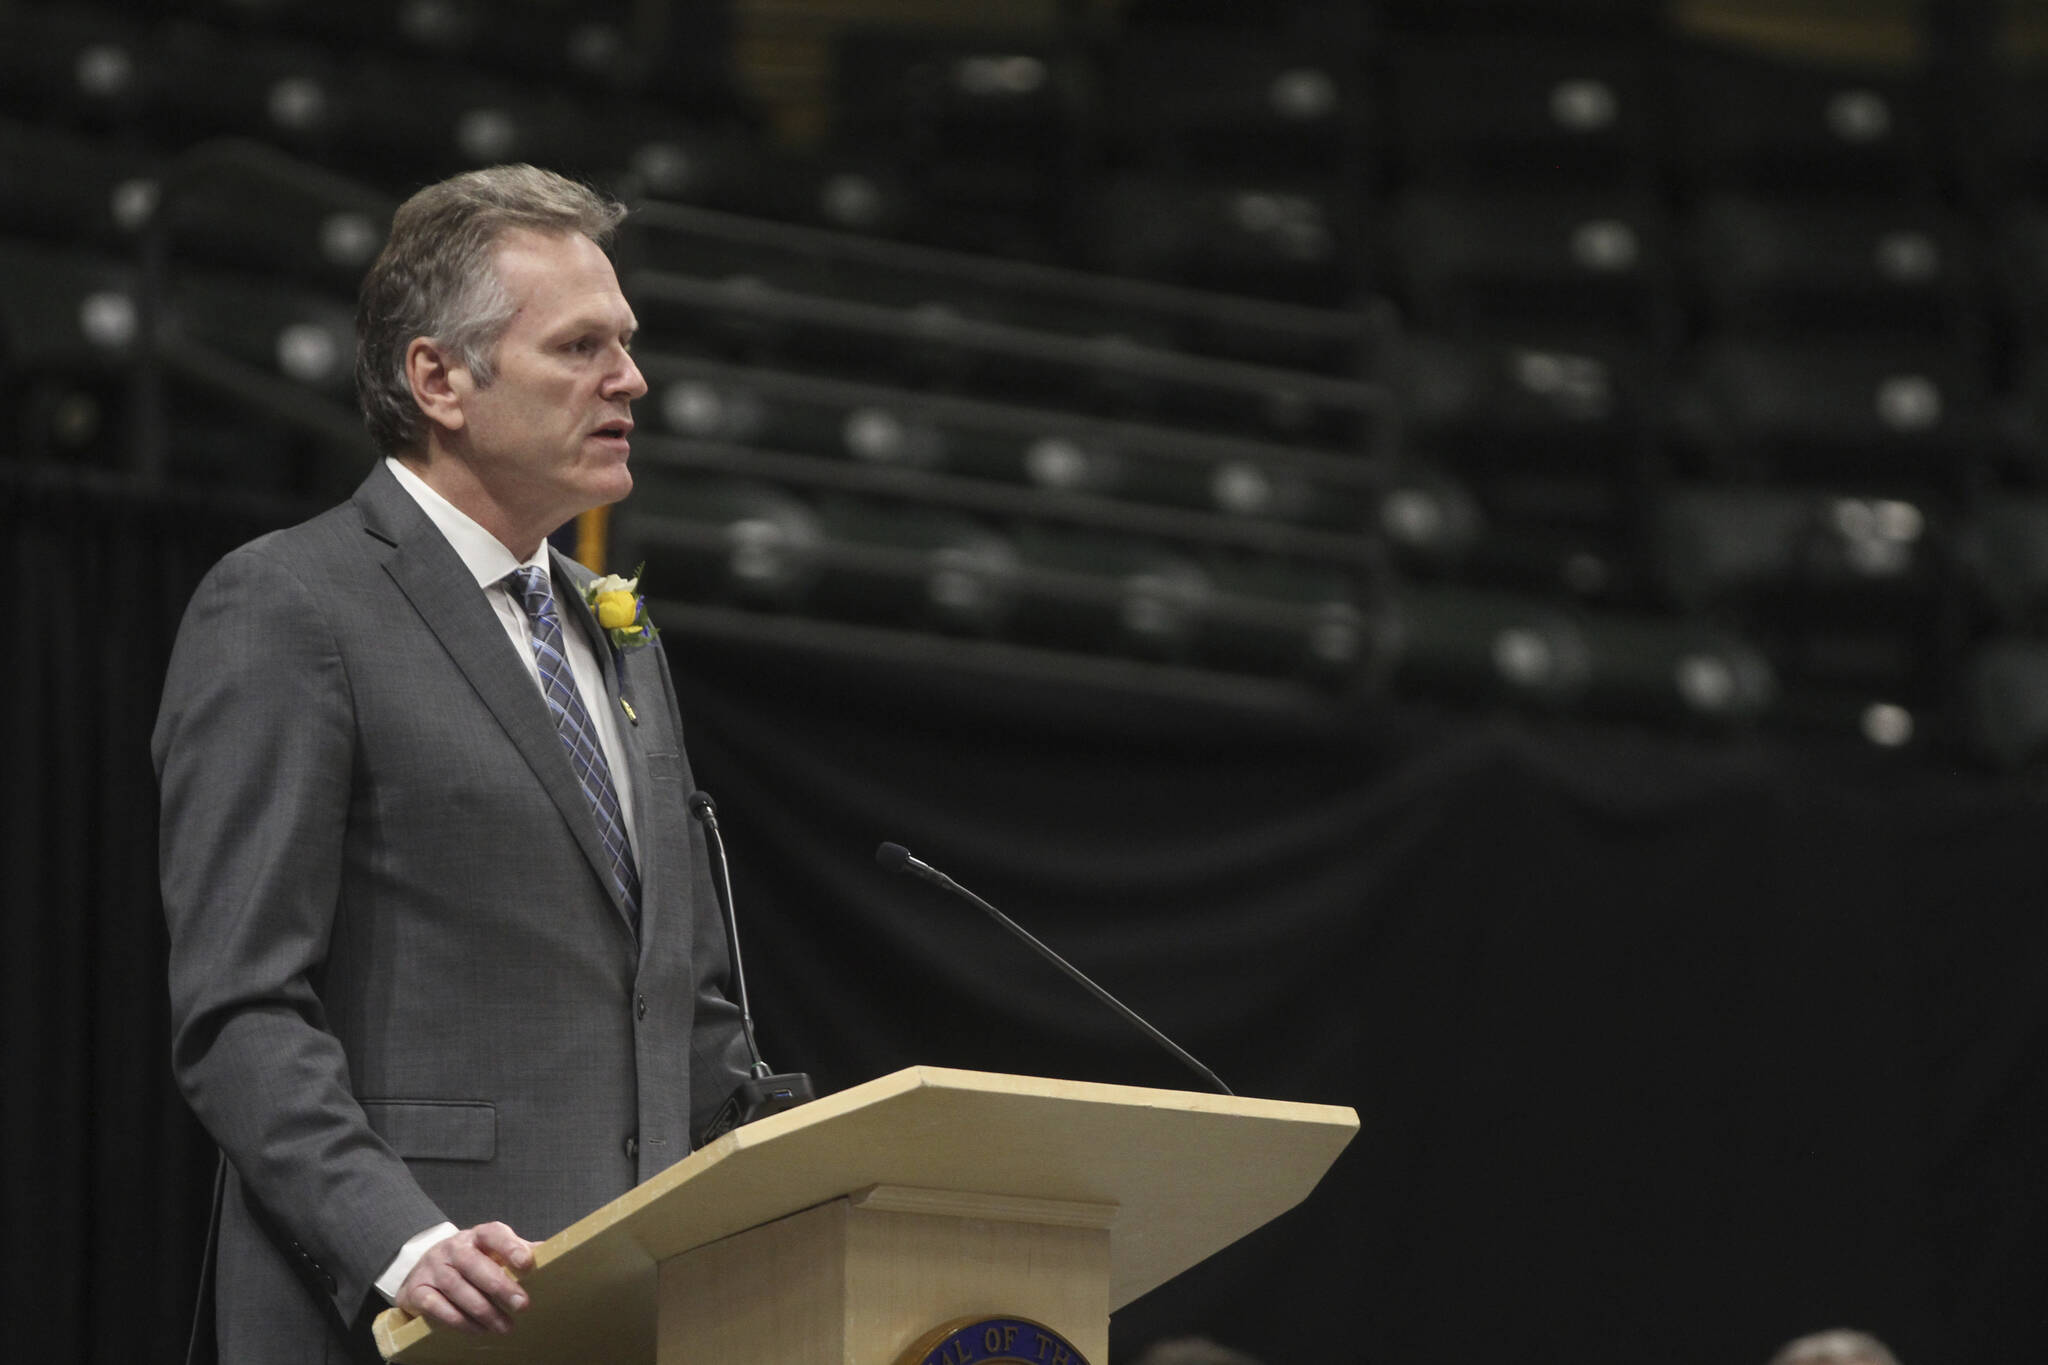 Alaska Gov. Mike Dunleavy addresses the audience during his inauguration ceremony Monday, Dec. 5, 2022, in Anchorage, Alaska. Dunleavy, a Republican, last month became the first Alaska governor since Democrat Tony Knowles in 1998 to win back-to-back terms. (AP Photo/Mark Thiessen)